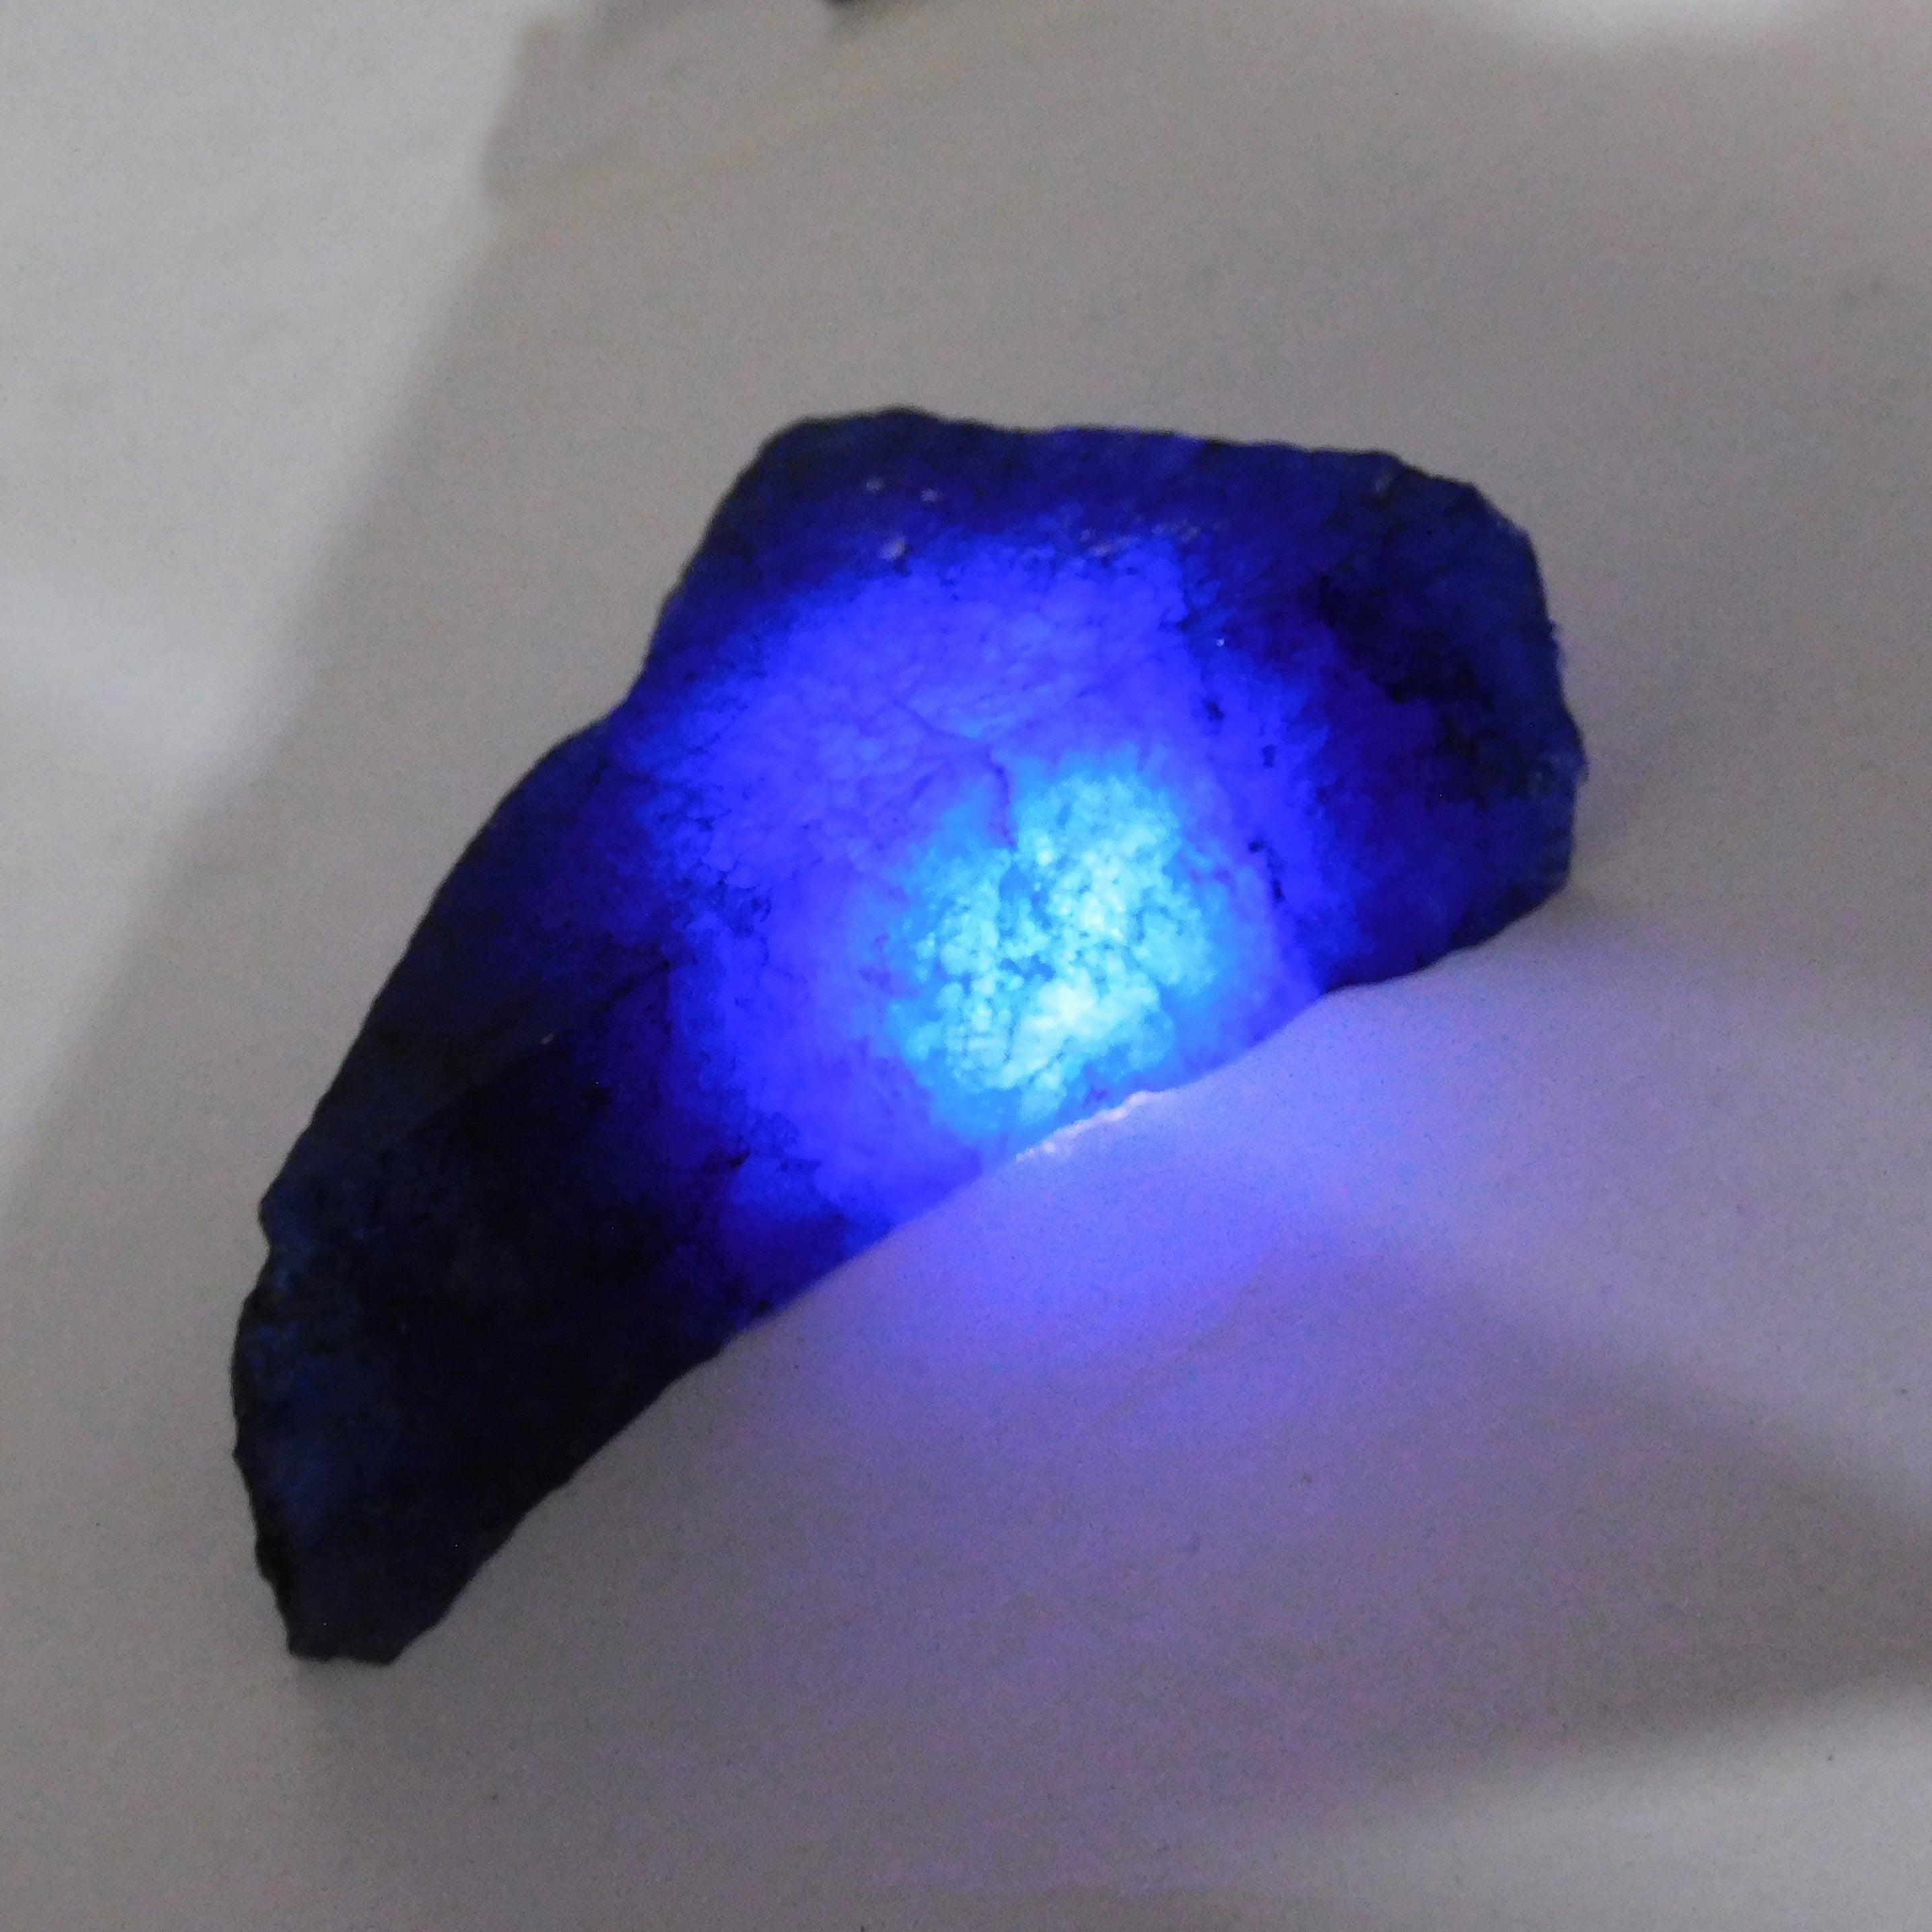 Uncut Raw Rough , Certified Natural 204.95 Carat Blue Rough Tanzanite Loose Gemstone | Free Shipping & Gift | Summer's Best Offer